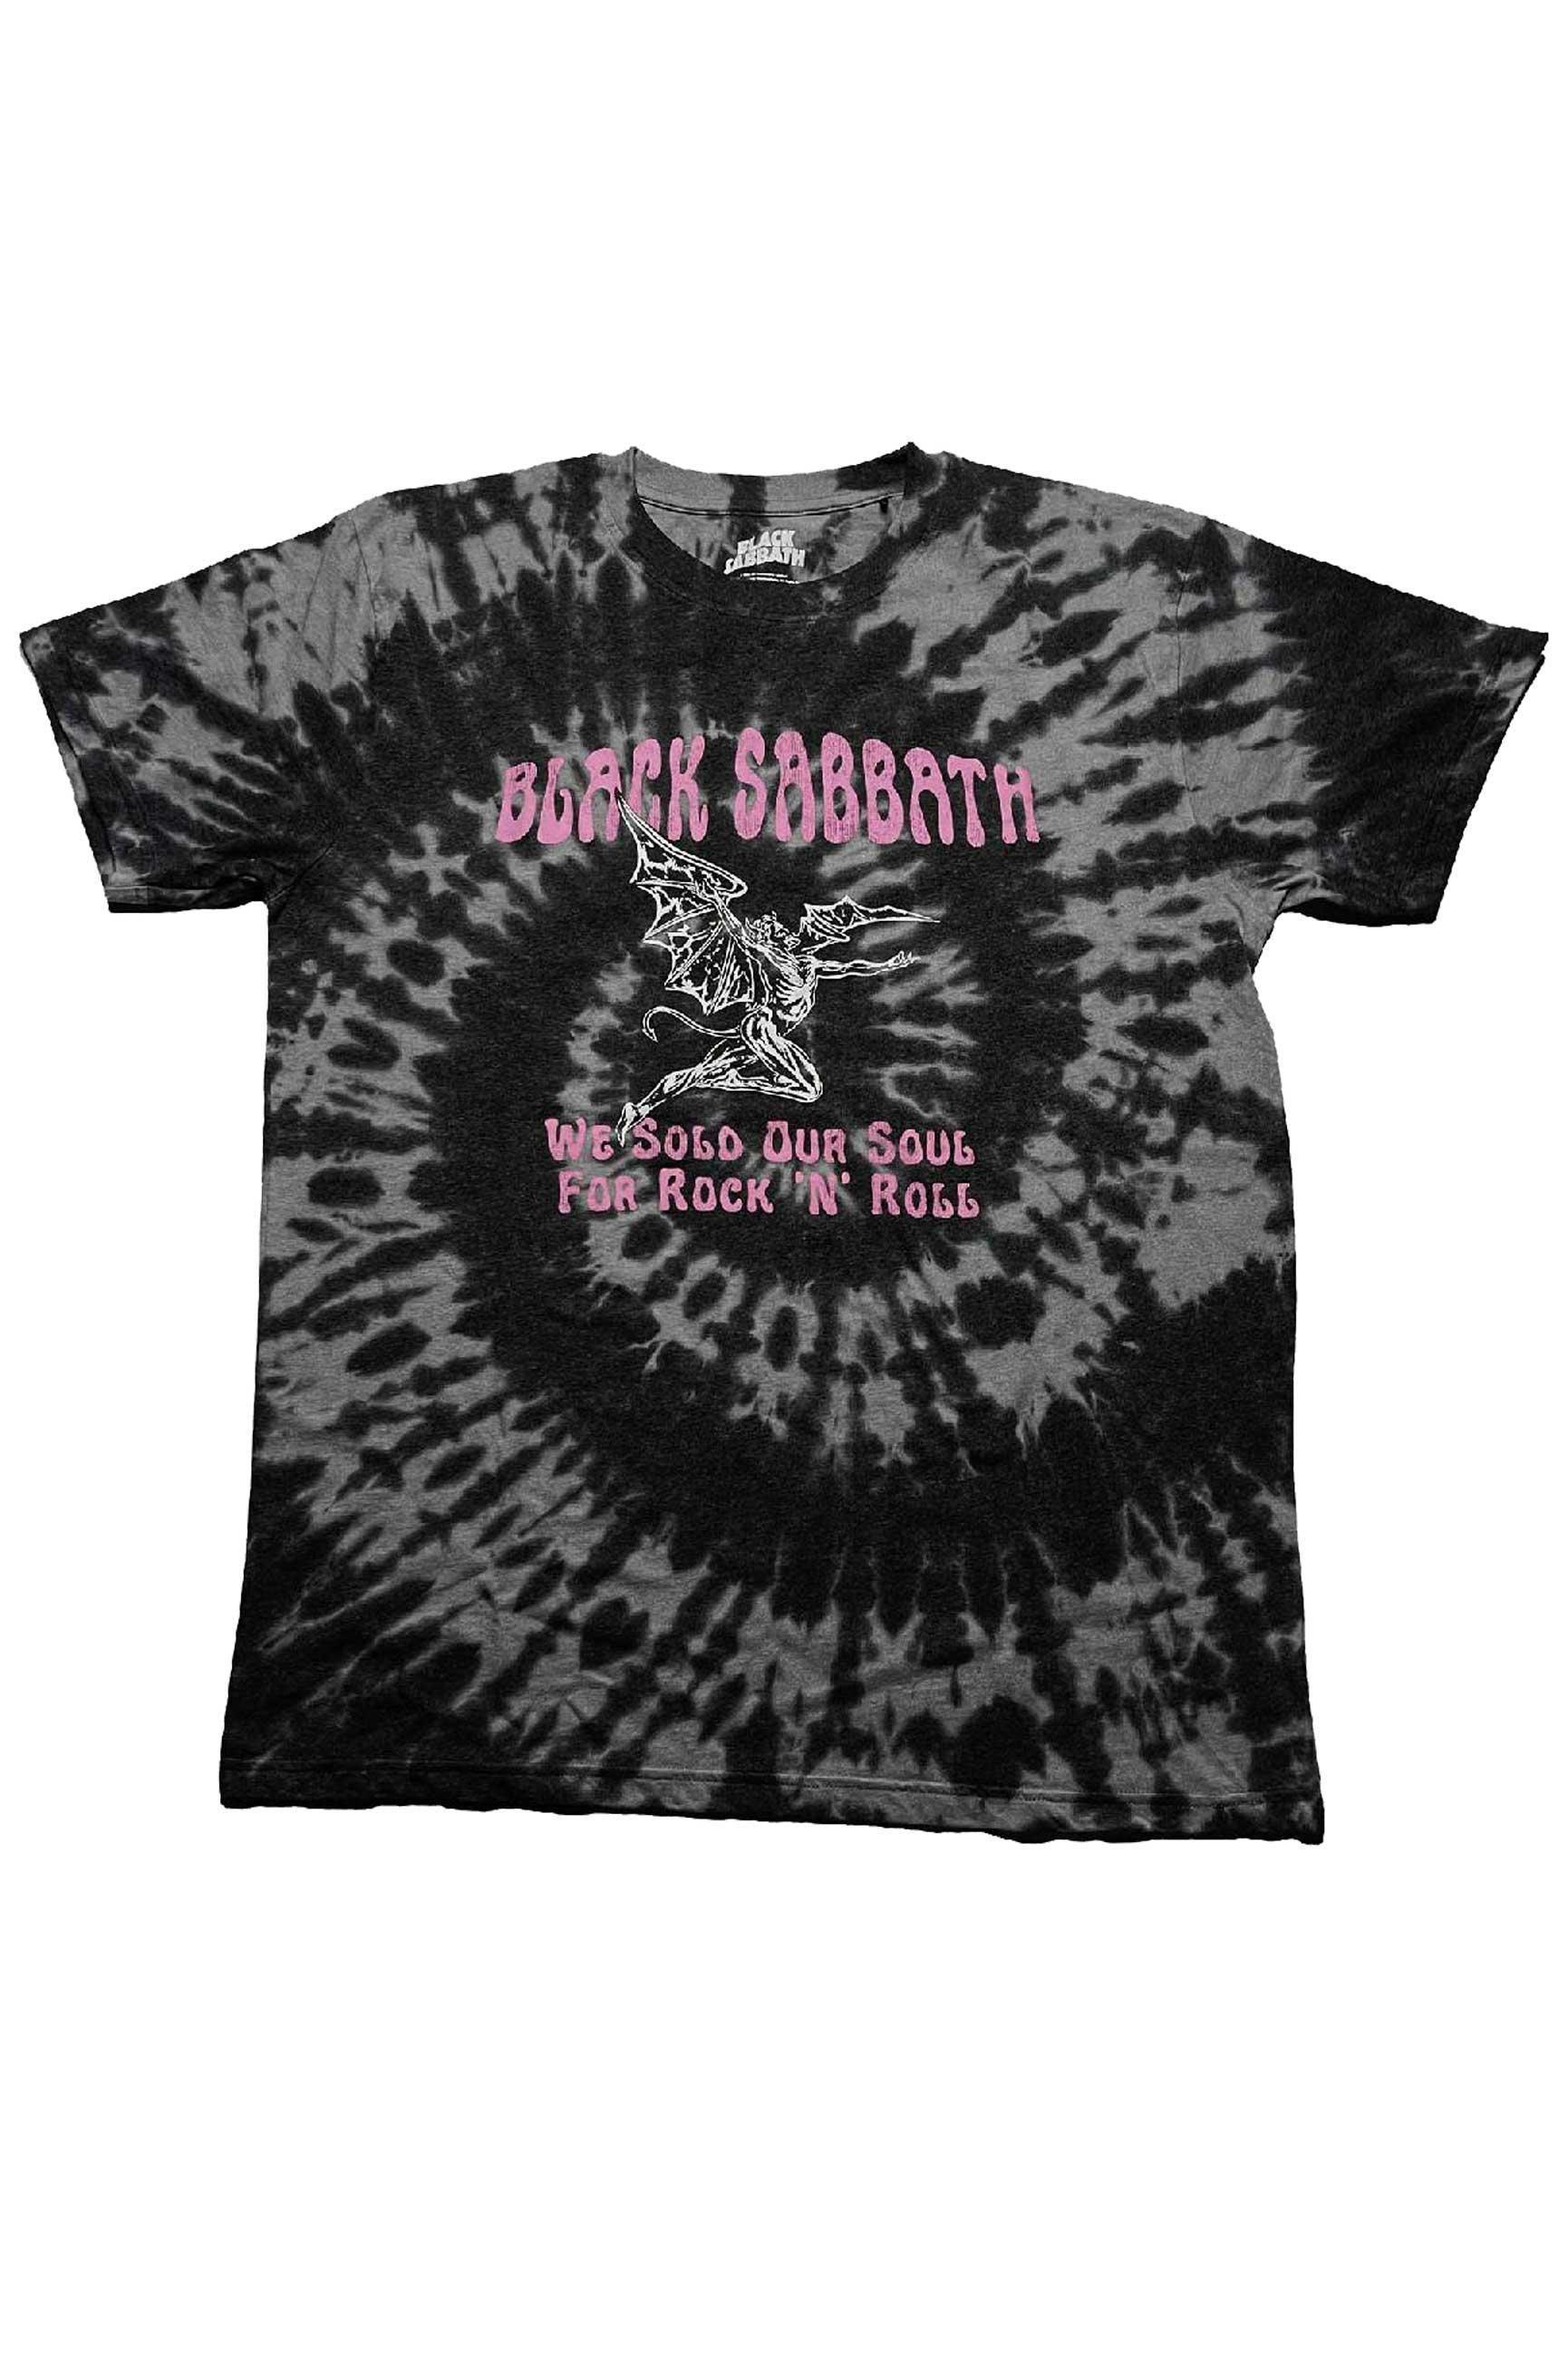 Black Sabbath T Shirt We Sold Our Soul For Rock N Roll new Official Unisex Black